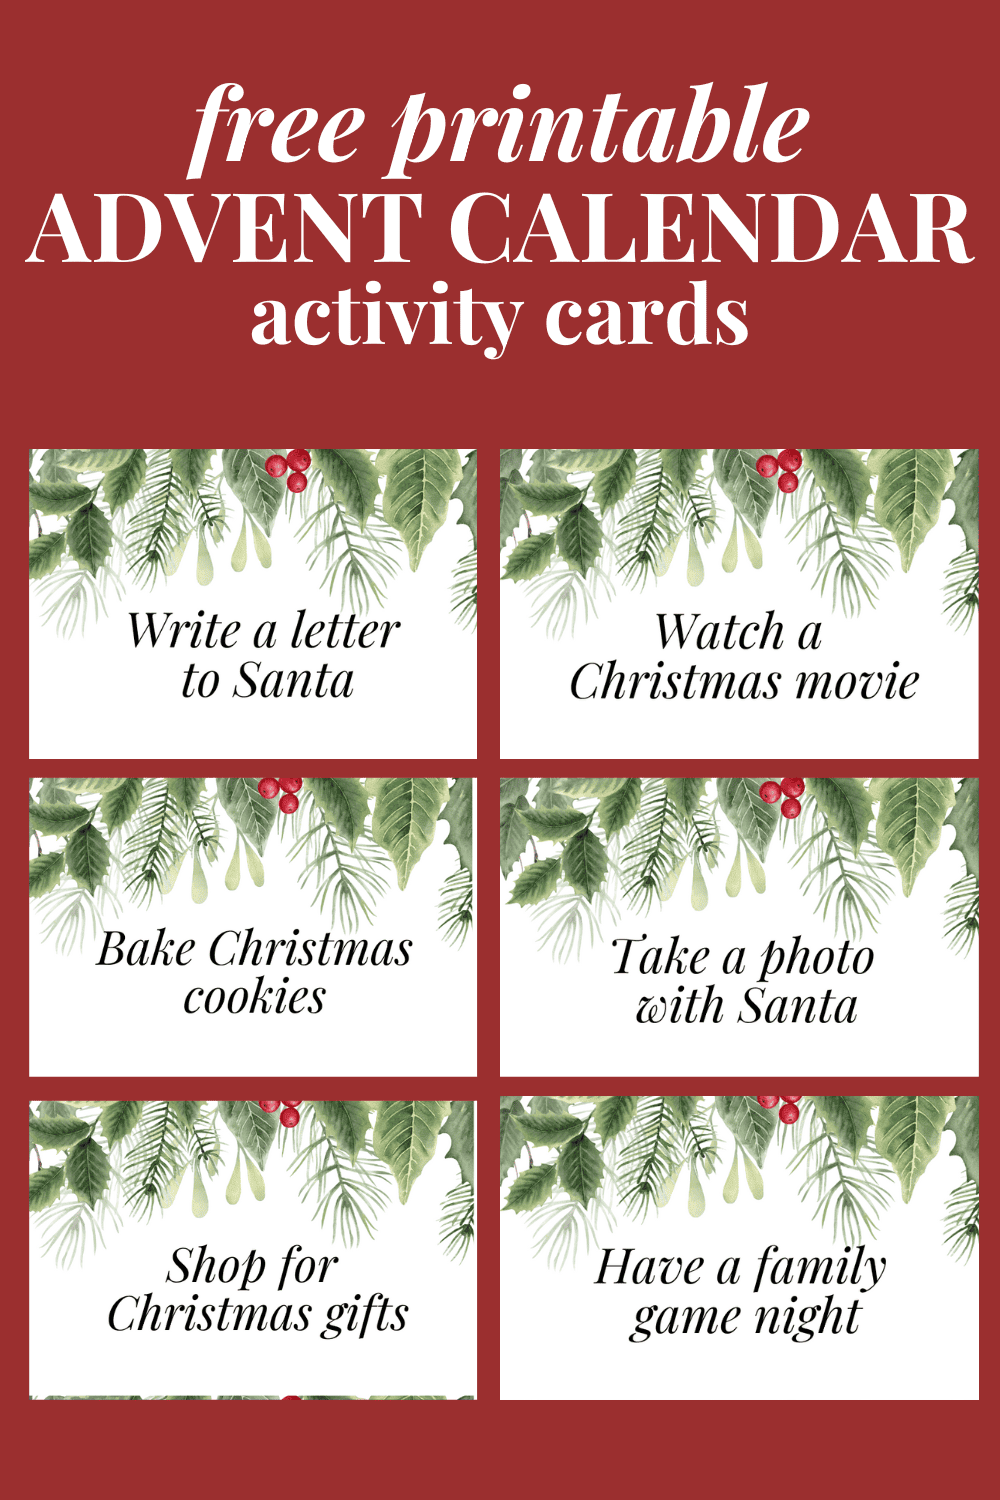 Graphic with text that says free printable advent calendar activity cards and has examples of the cards 